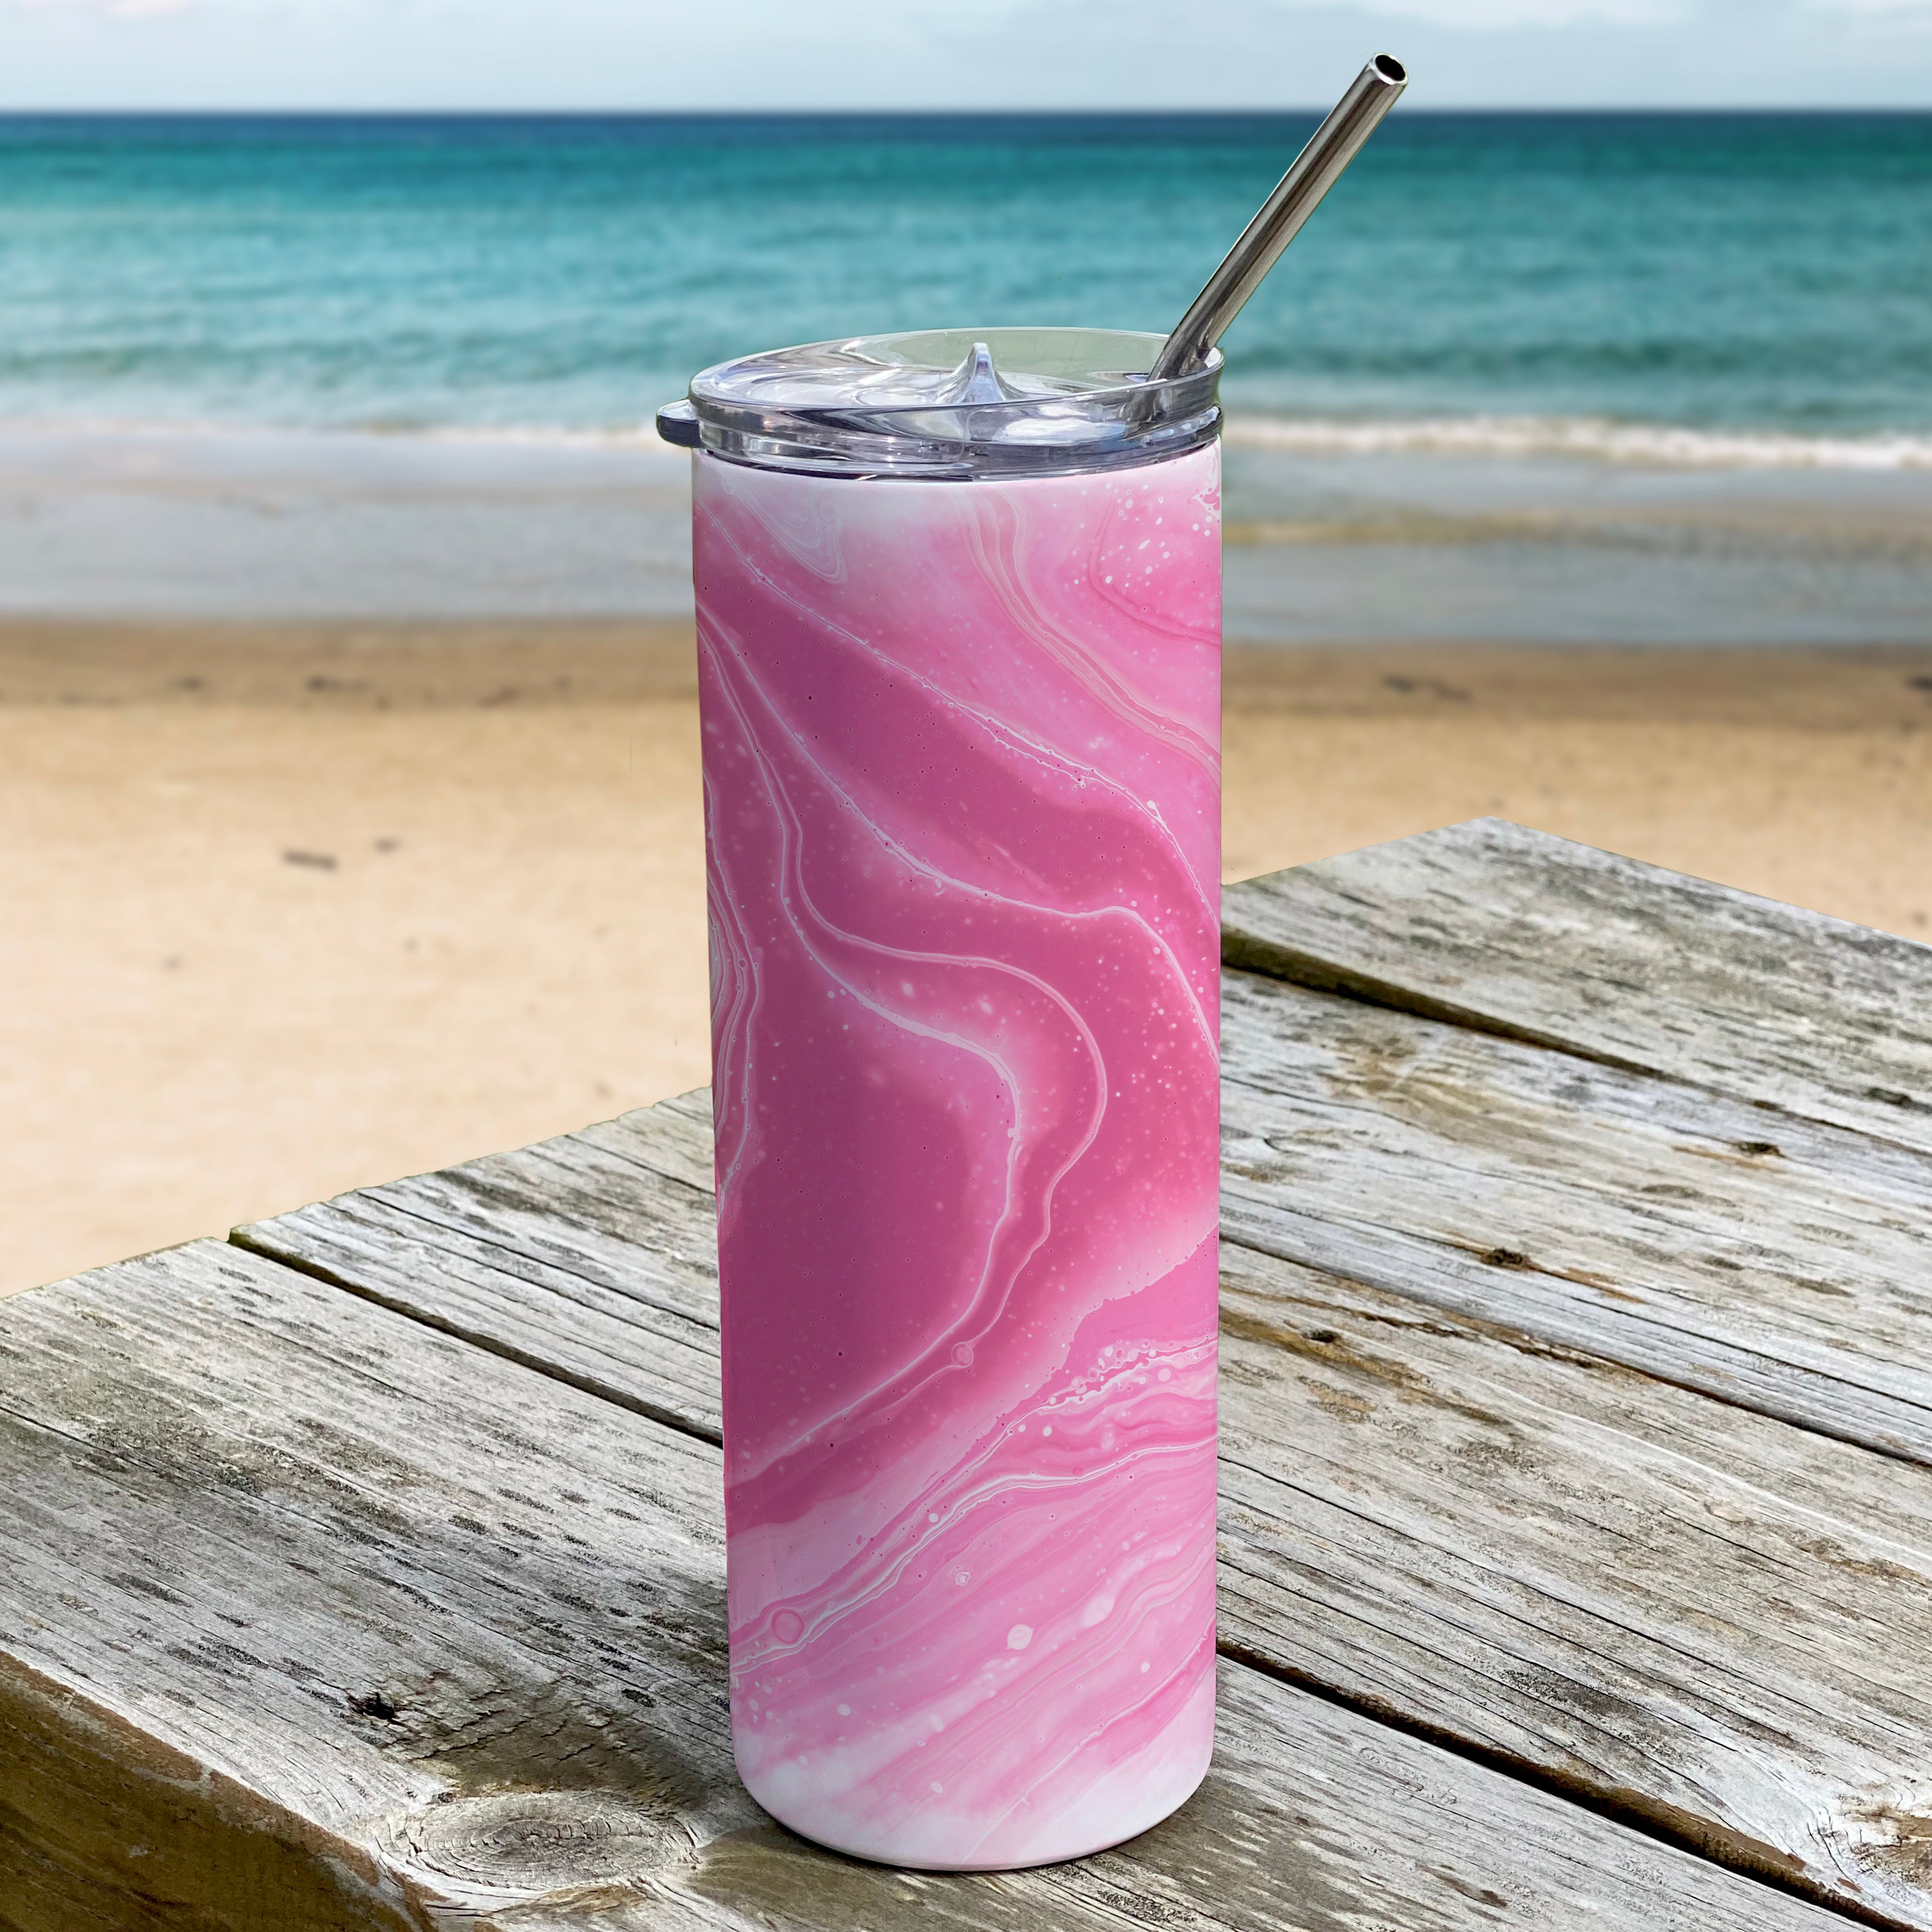 Trend Setters Original (Pink Marble) 20oz Stainless Steel Travel Tumbler with Straw